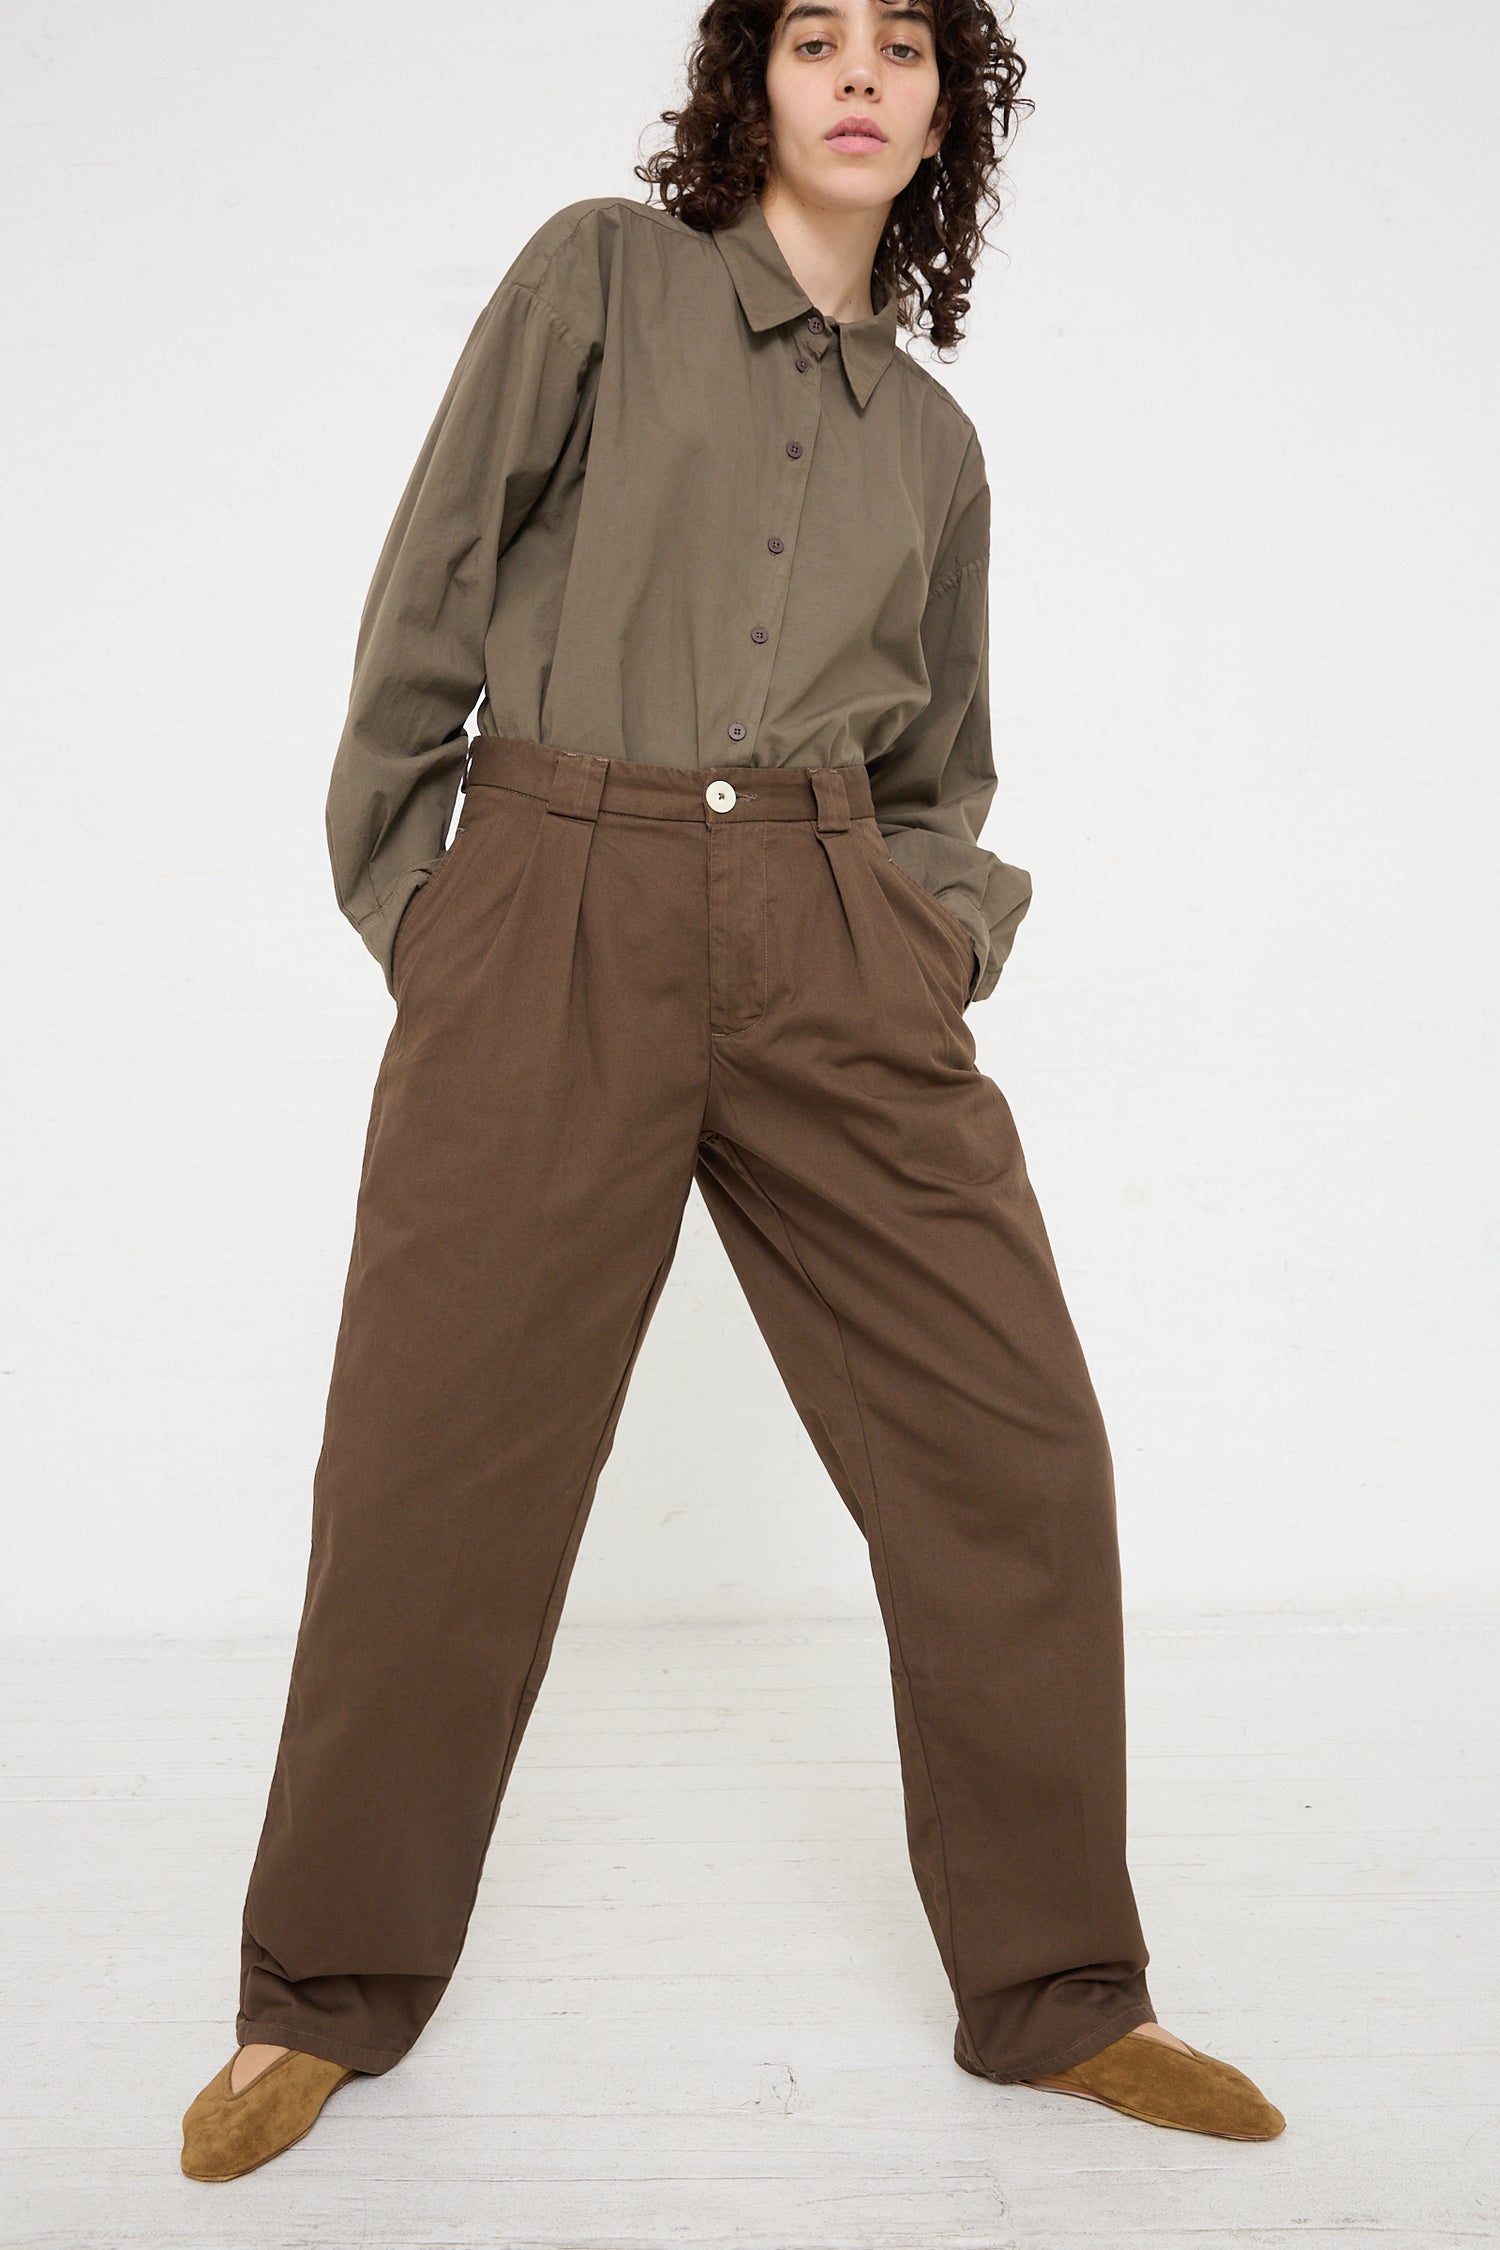 A woman wearing the Jesse Kamm organic cotton brown wide leg pants and The Trouser in Mushroom.